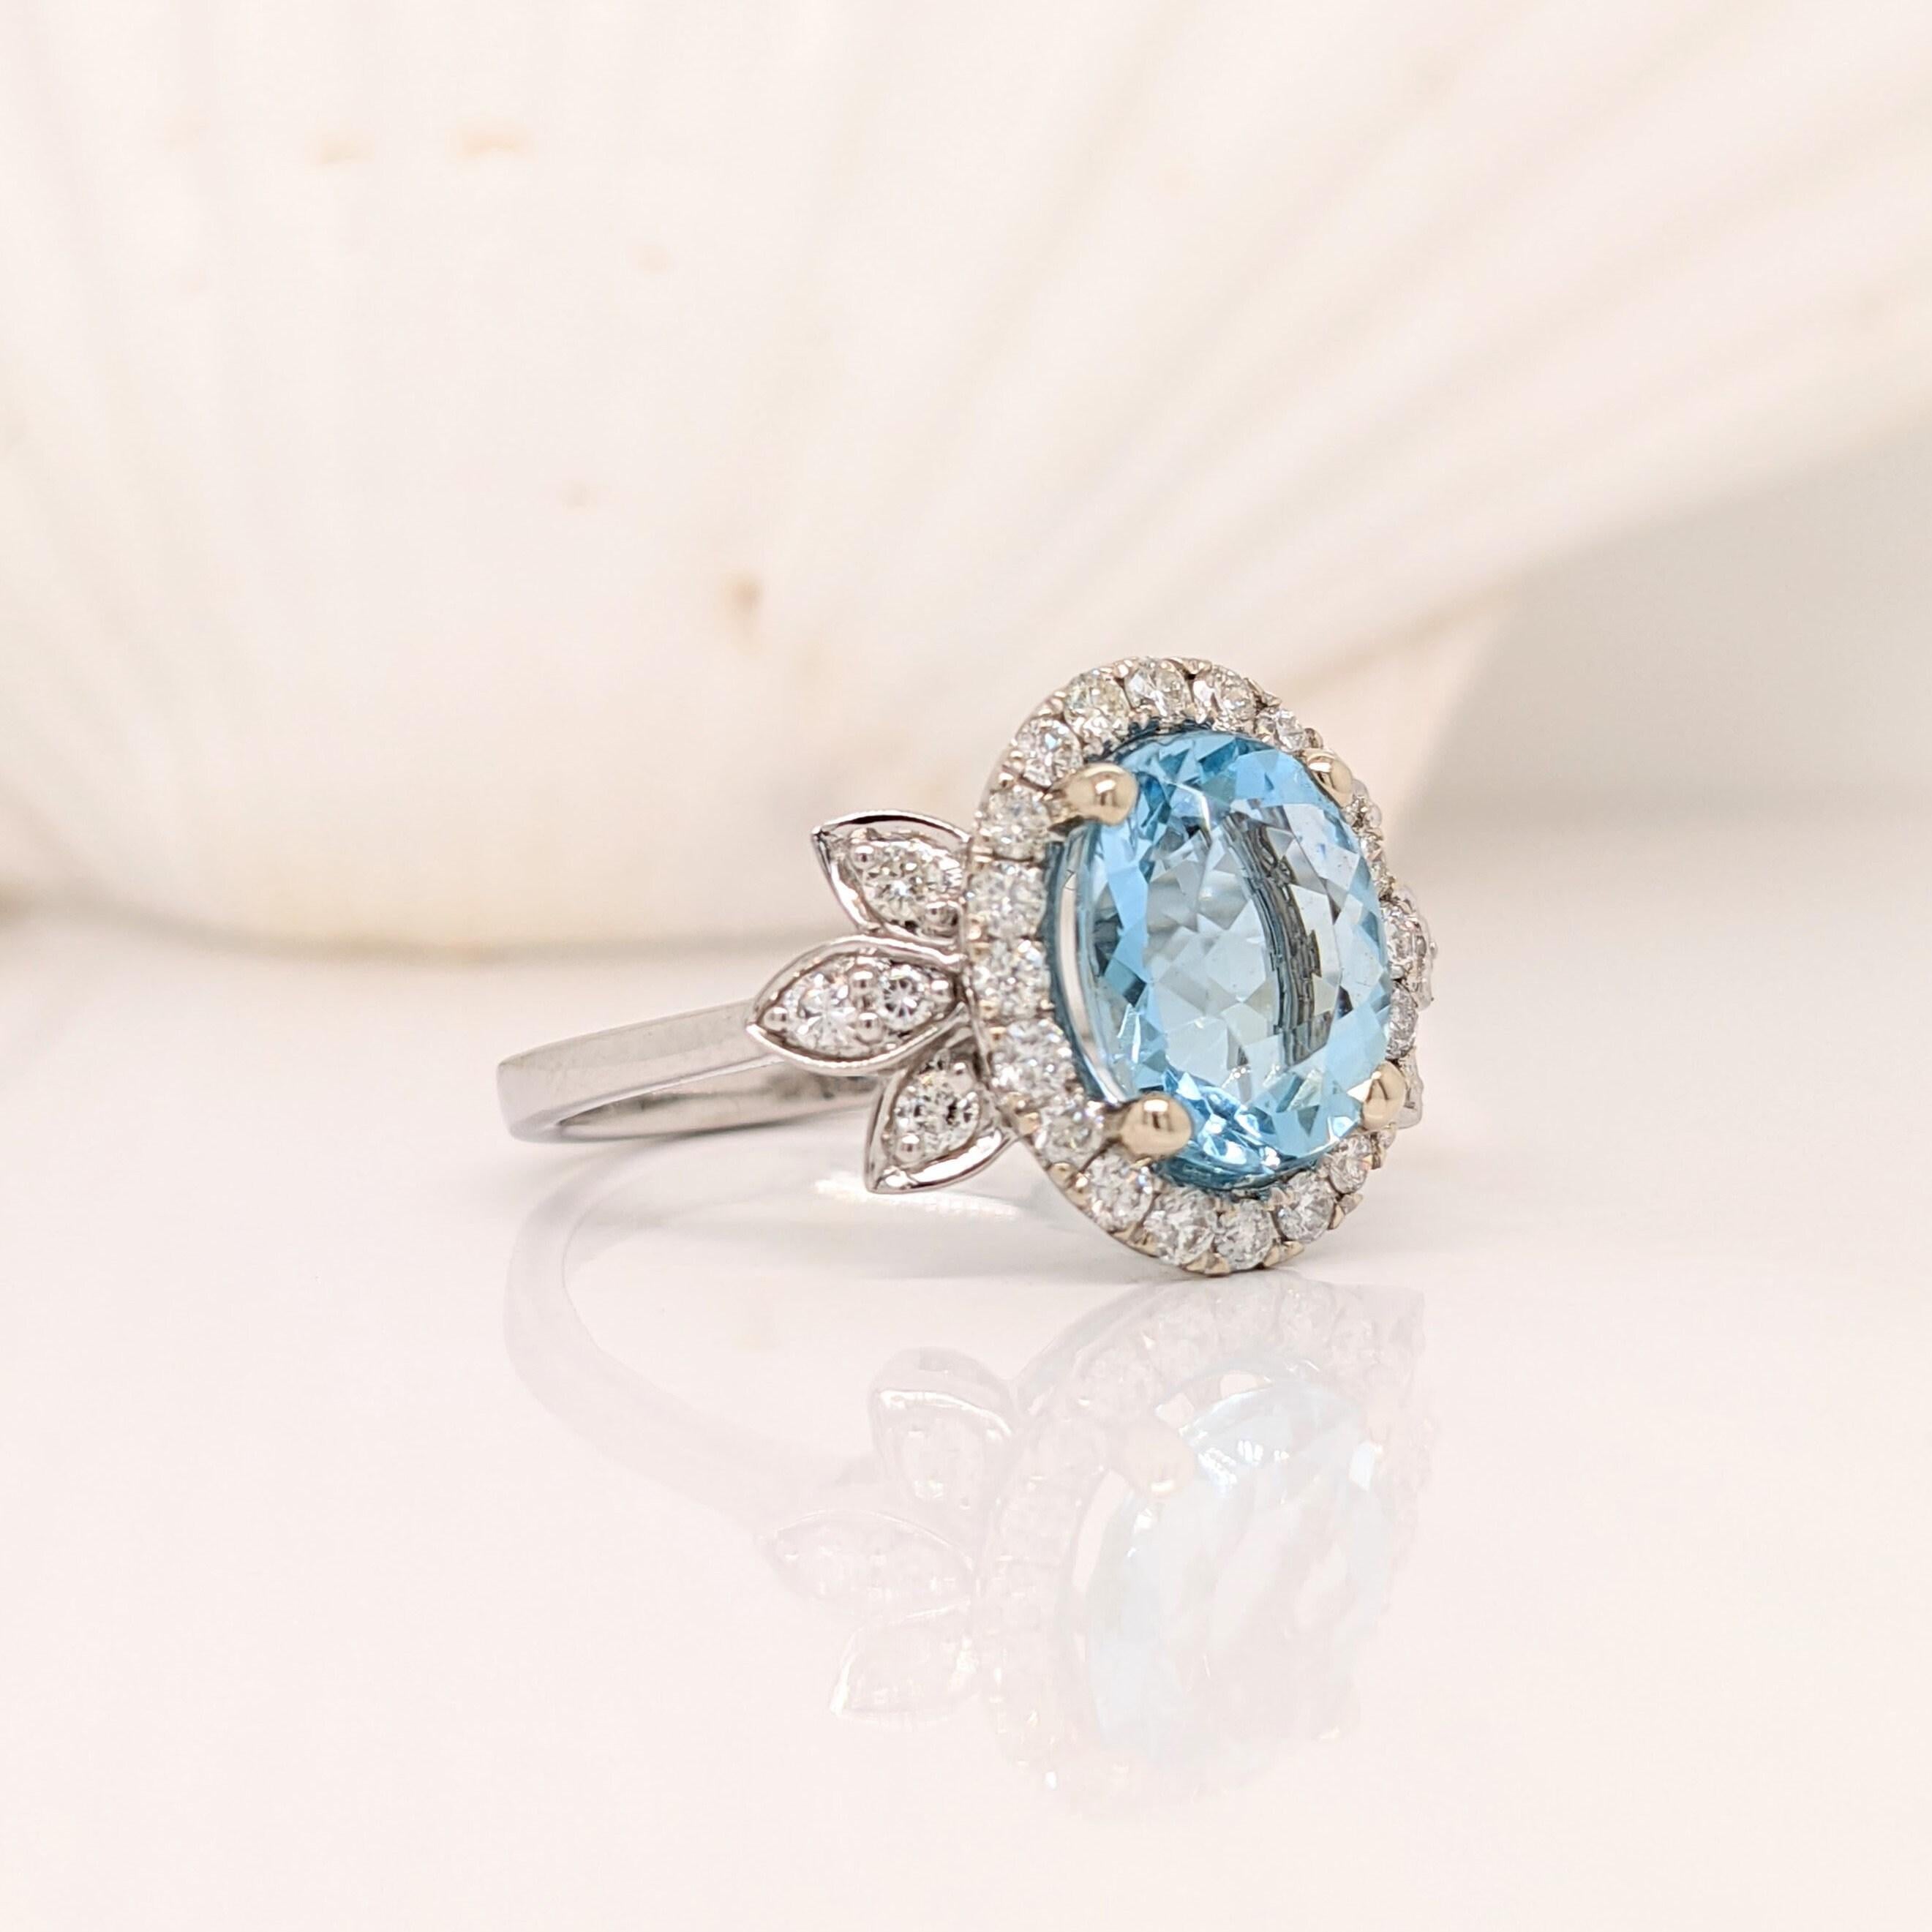 A blue aquamarine in 14k white gold with all natural earth mined diamond accents. A statement ring design perfect for an eye catching engagement or anniversary. This ring also makes a beautiful birthstone ring for your loved